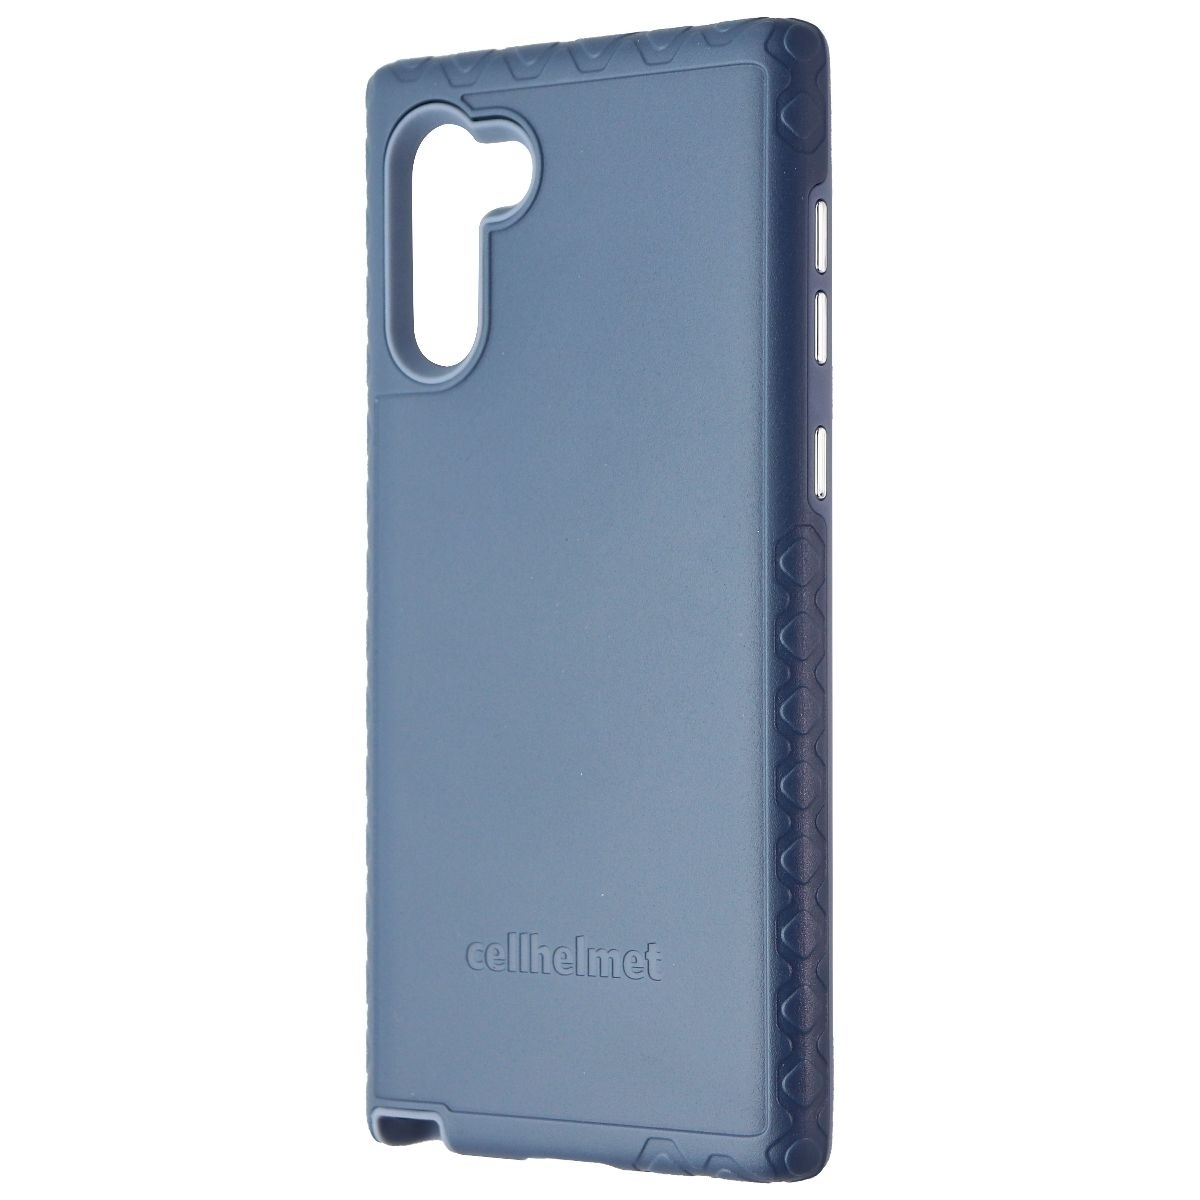 Cellhelmet Fortitude Pro Series Slate Blue Phone Case For Samsung Galaxy Note 10